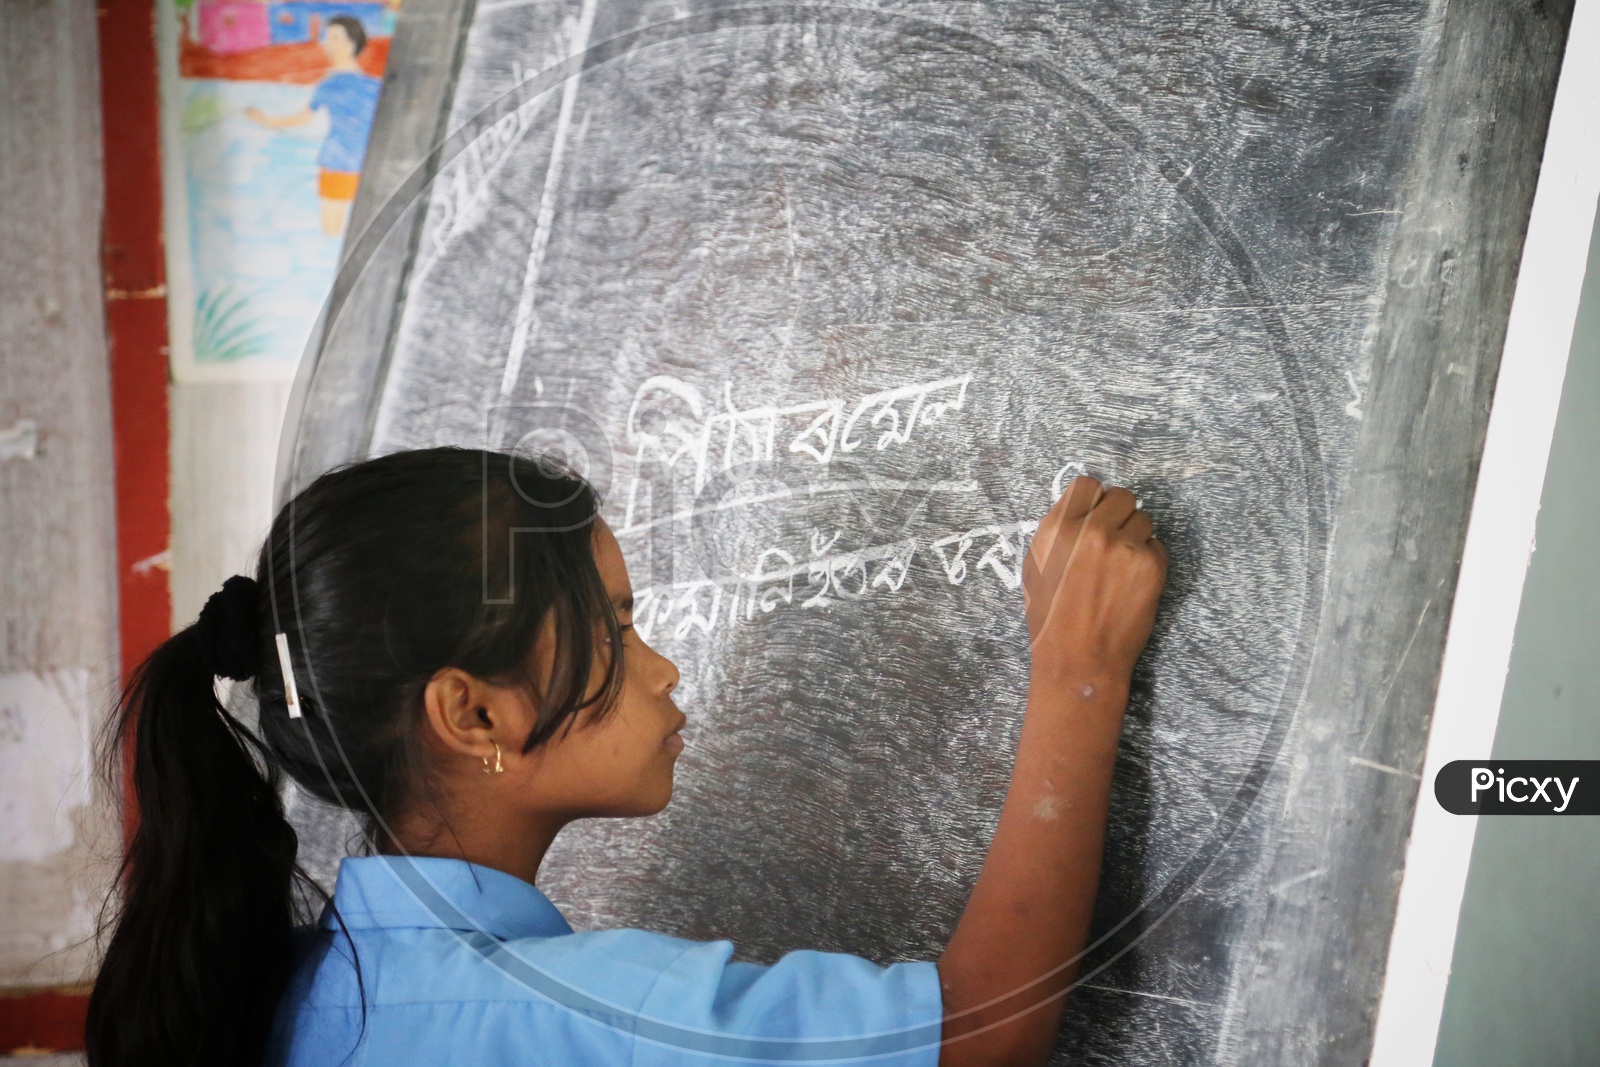 A  Girl Student  Writing On The  School Blackboard in A Classroom